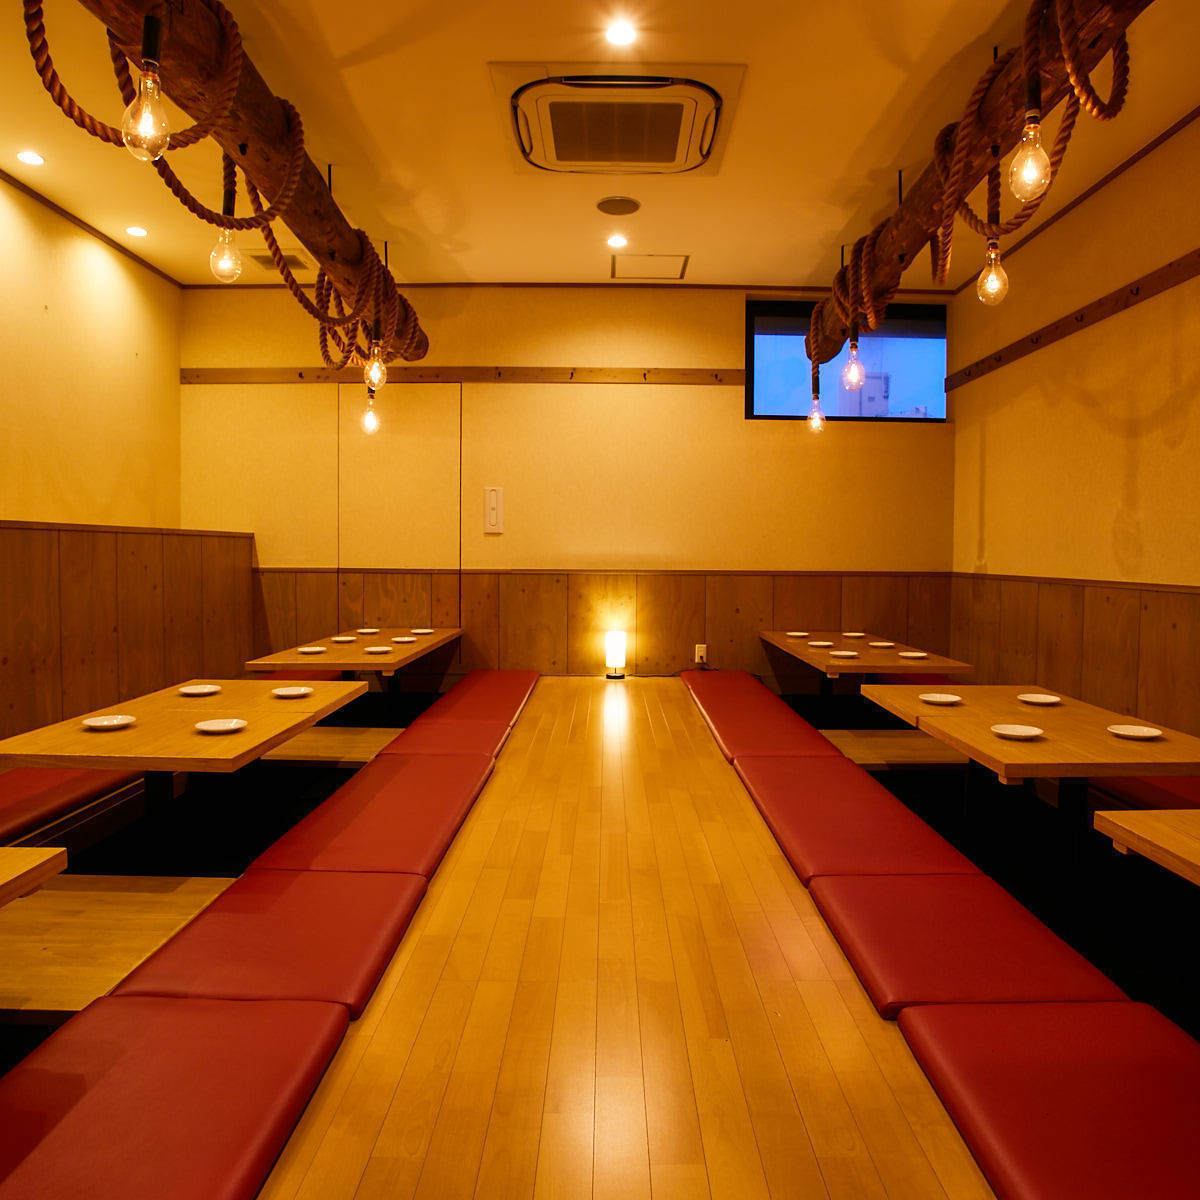 Fully equipped with private rooms that can accommodate small to large groups!